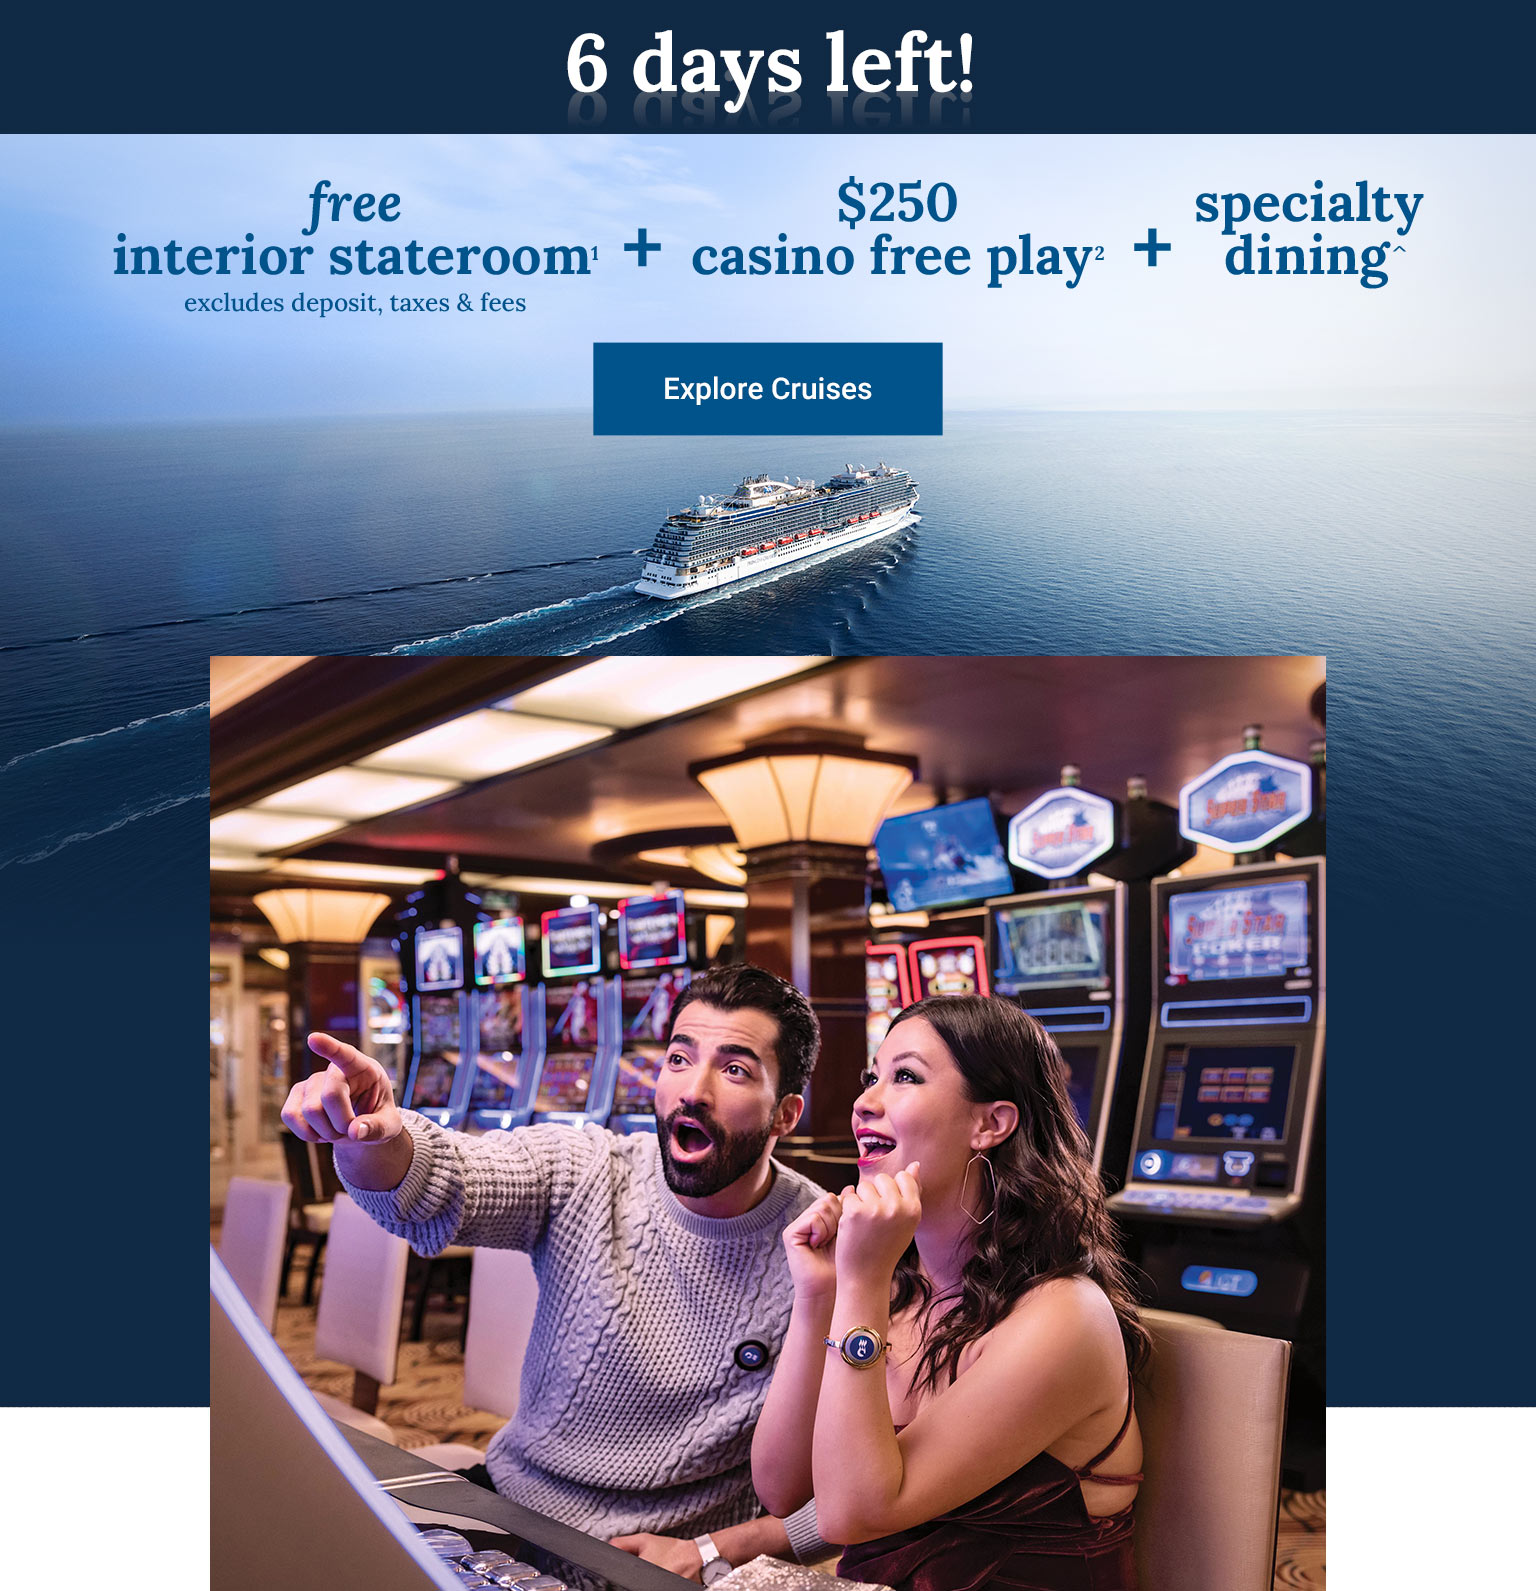 free interior stateroom + $250 casino free play + specialty dining. Click here to book.